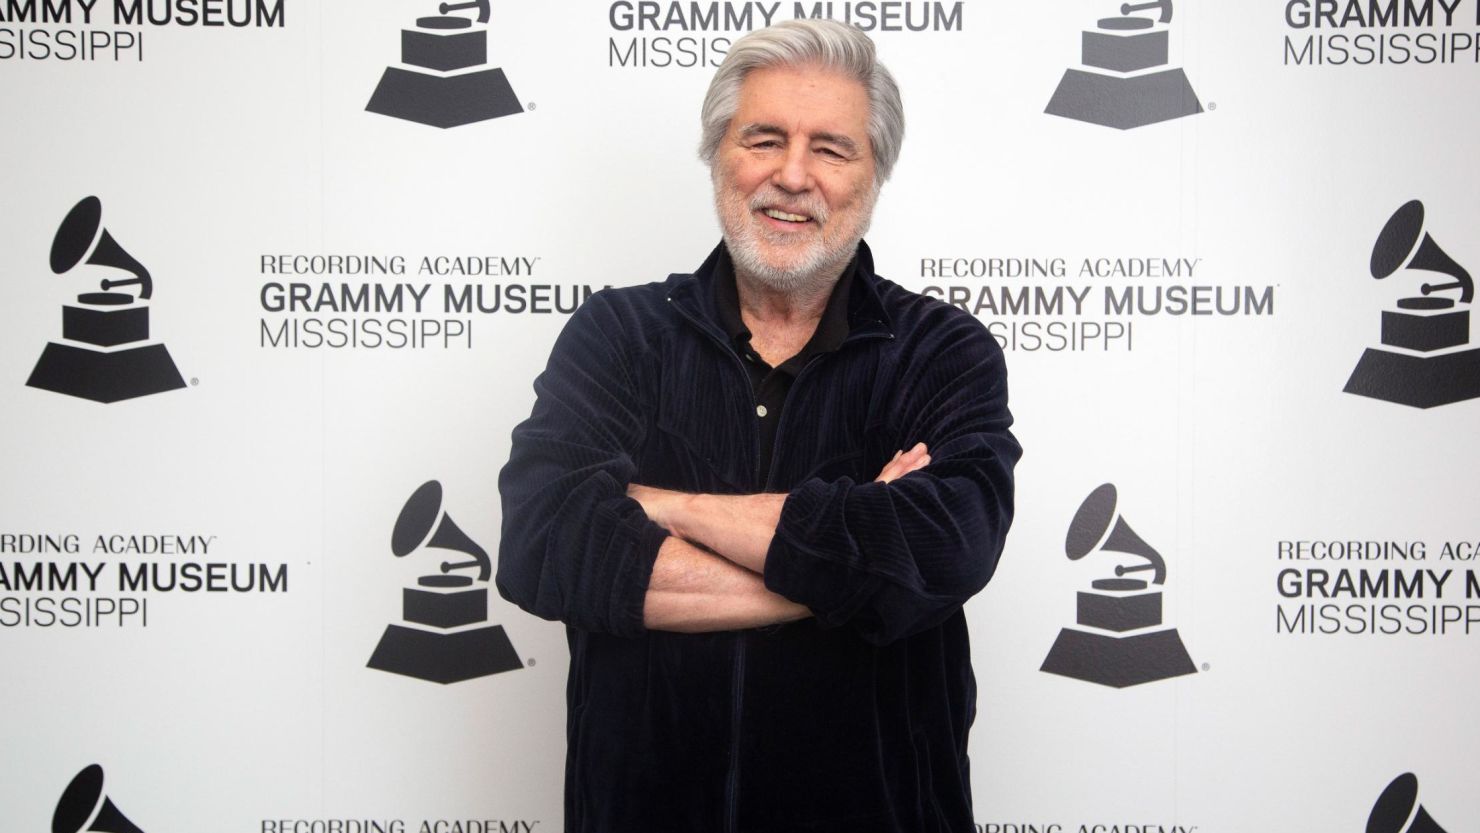 Jim Weatherly poses at a Grammy event in Cleveland, Mississippi, in March 2019.